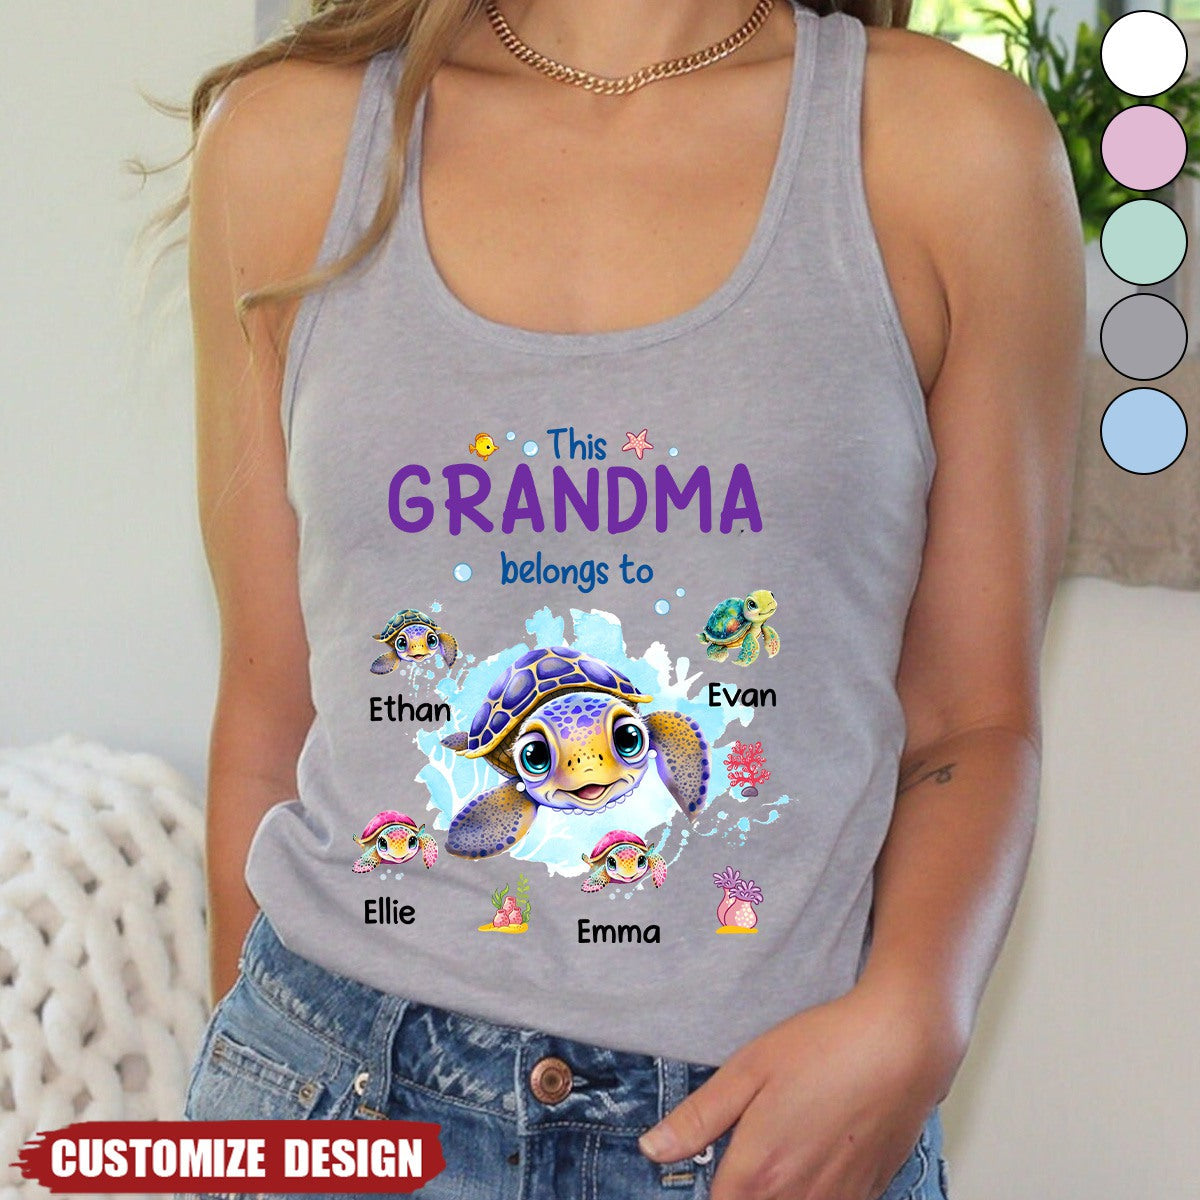 This Grandma Belongs To - Family Personalized Racer Back Tank Top - Gift For Mom, Grandma